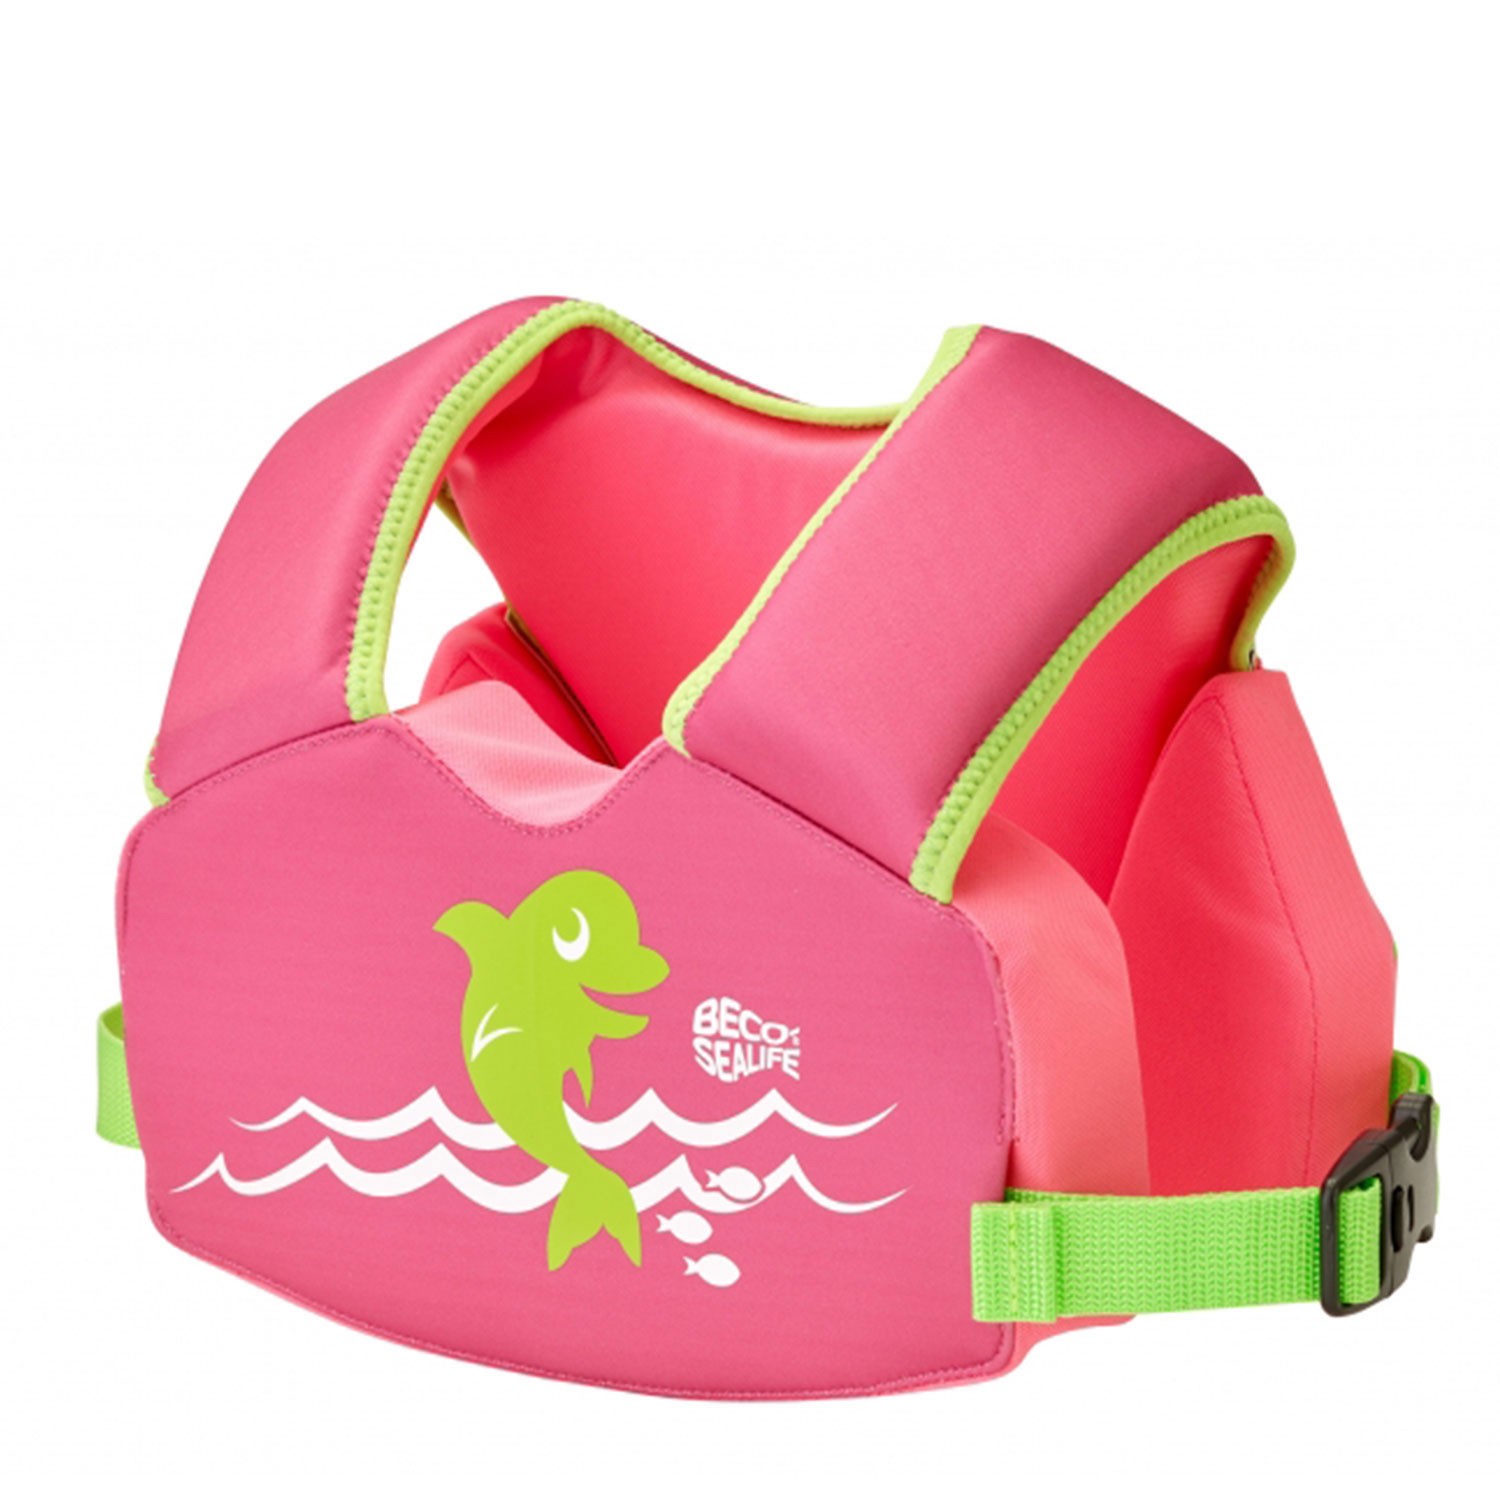 Beco Sealife Schwimmweste EASY FIT